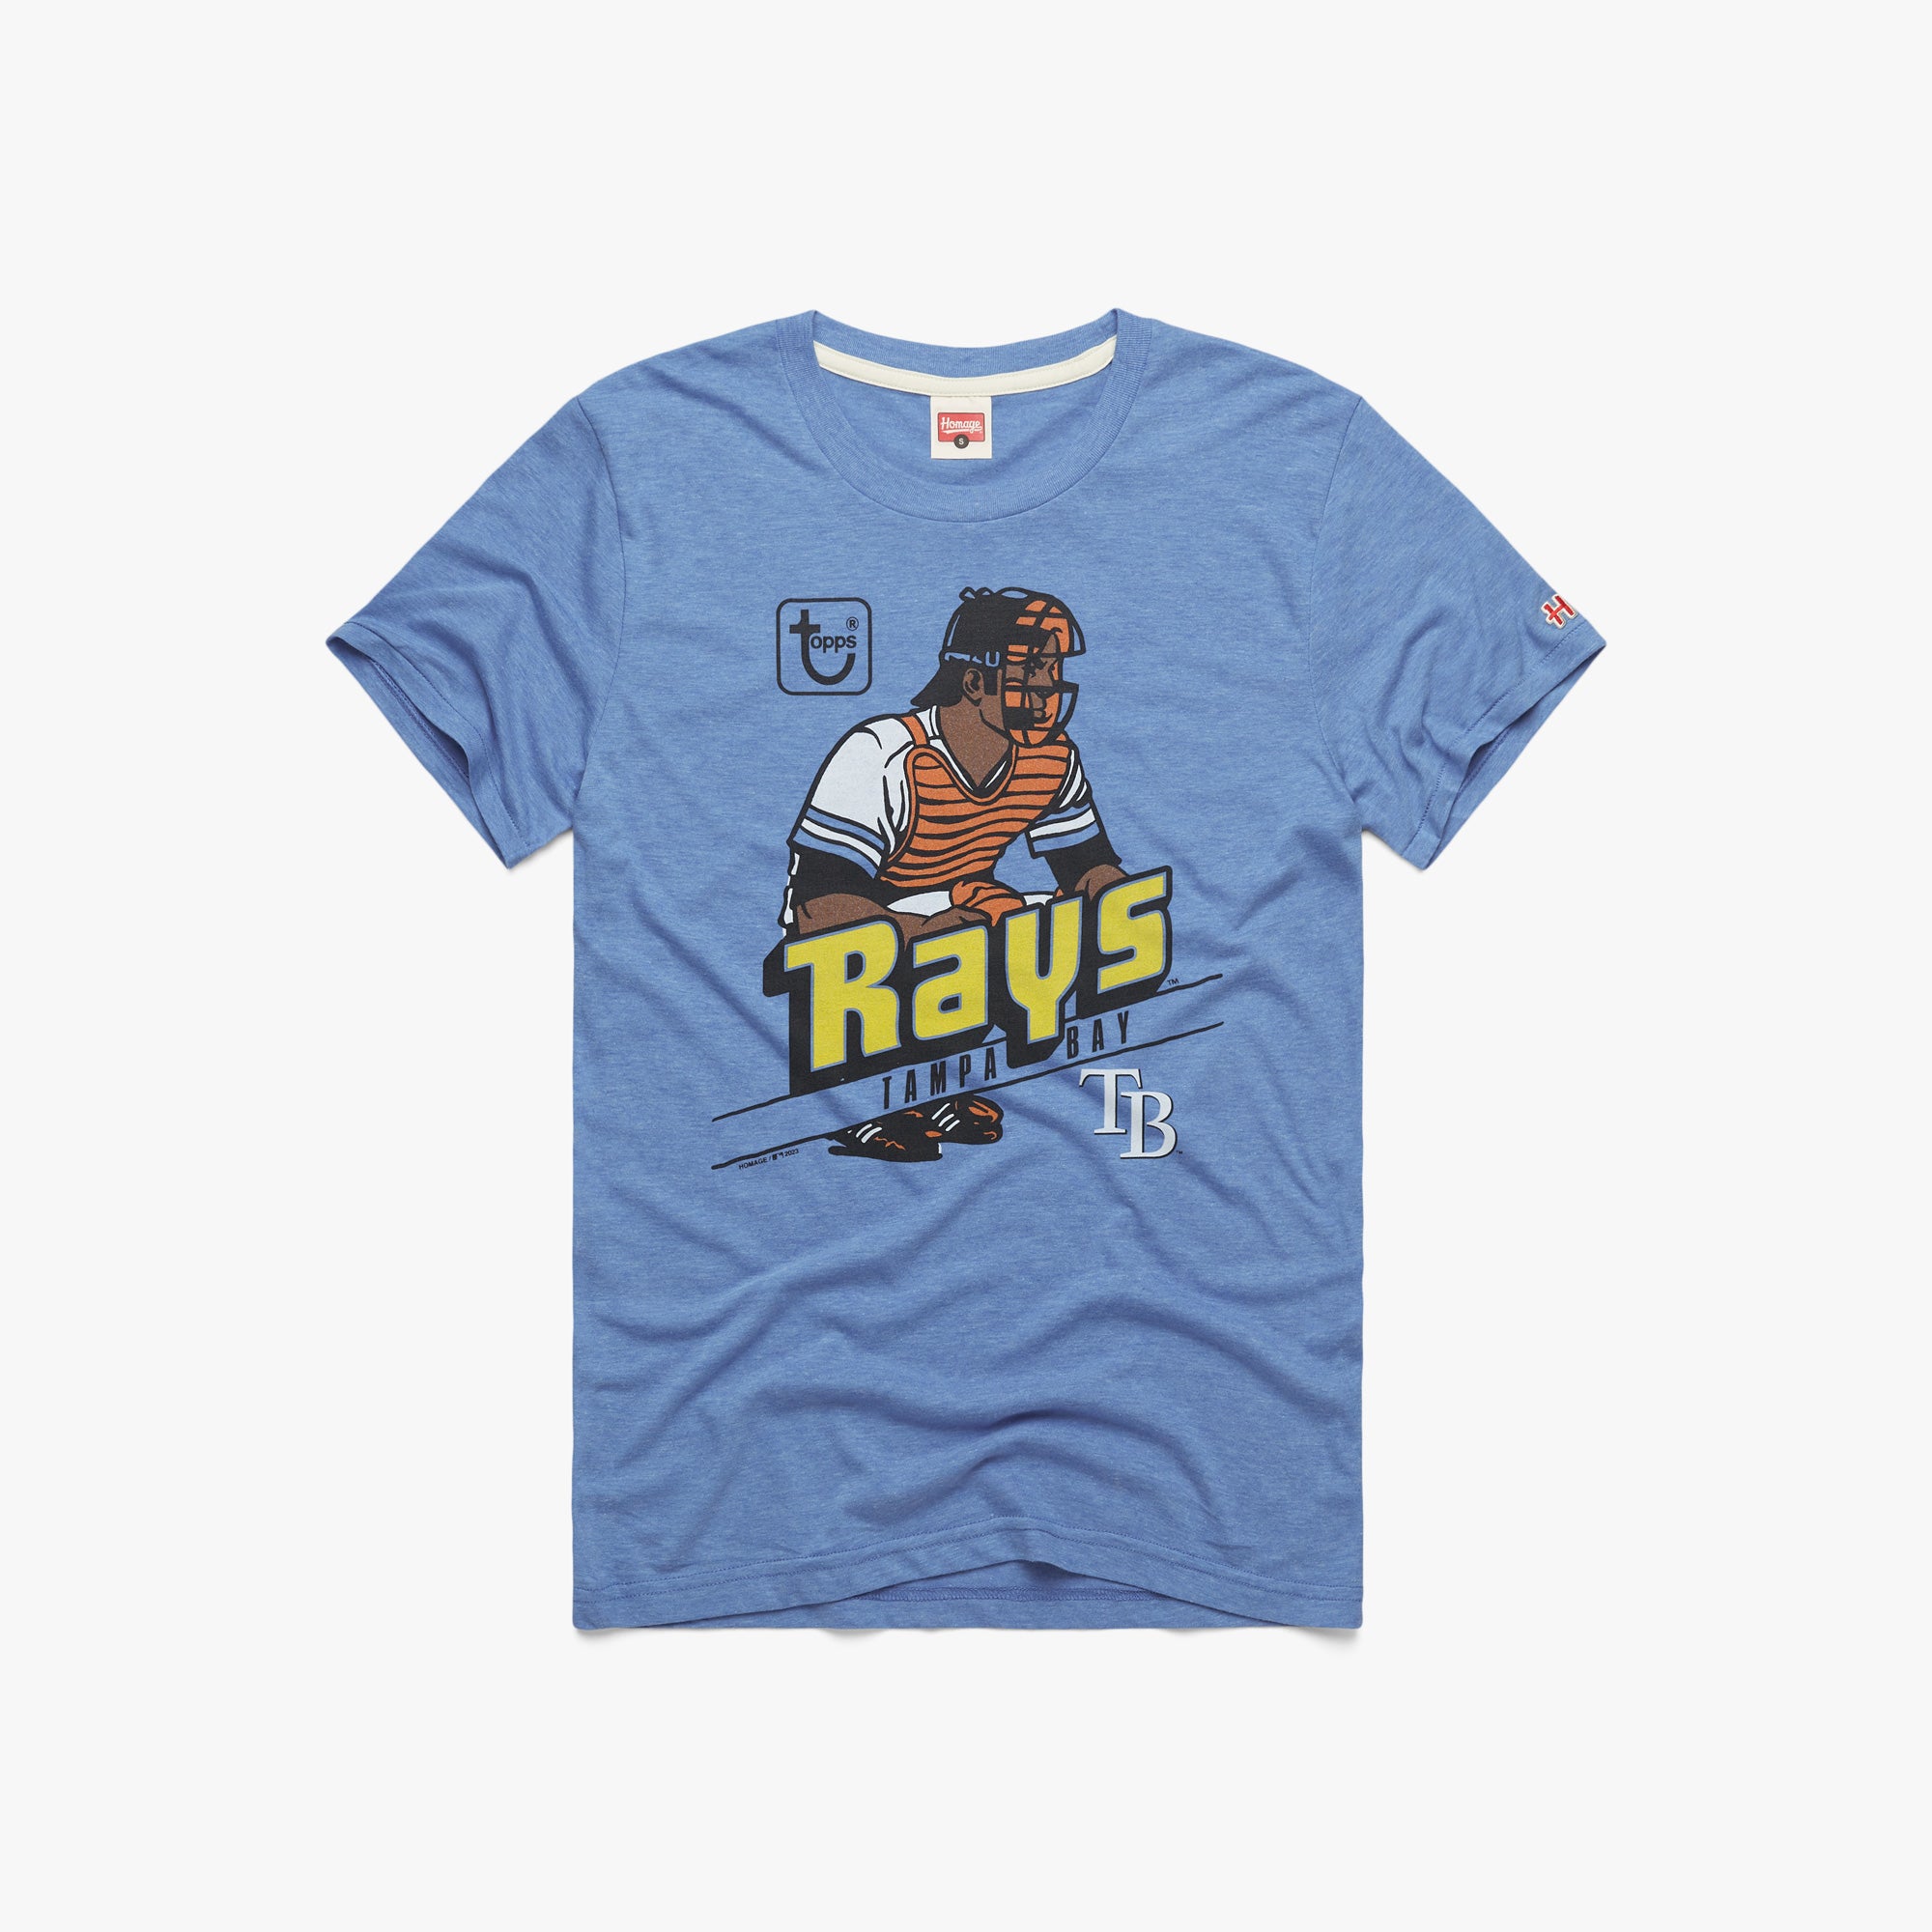 Tampa Bay Rays on X: The team store has some new Devil Rays swag